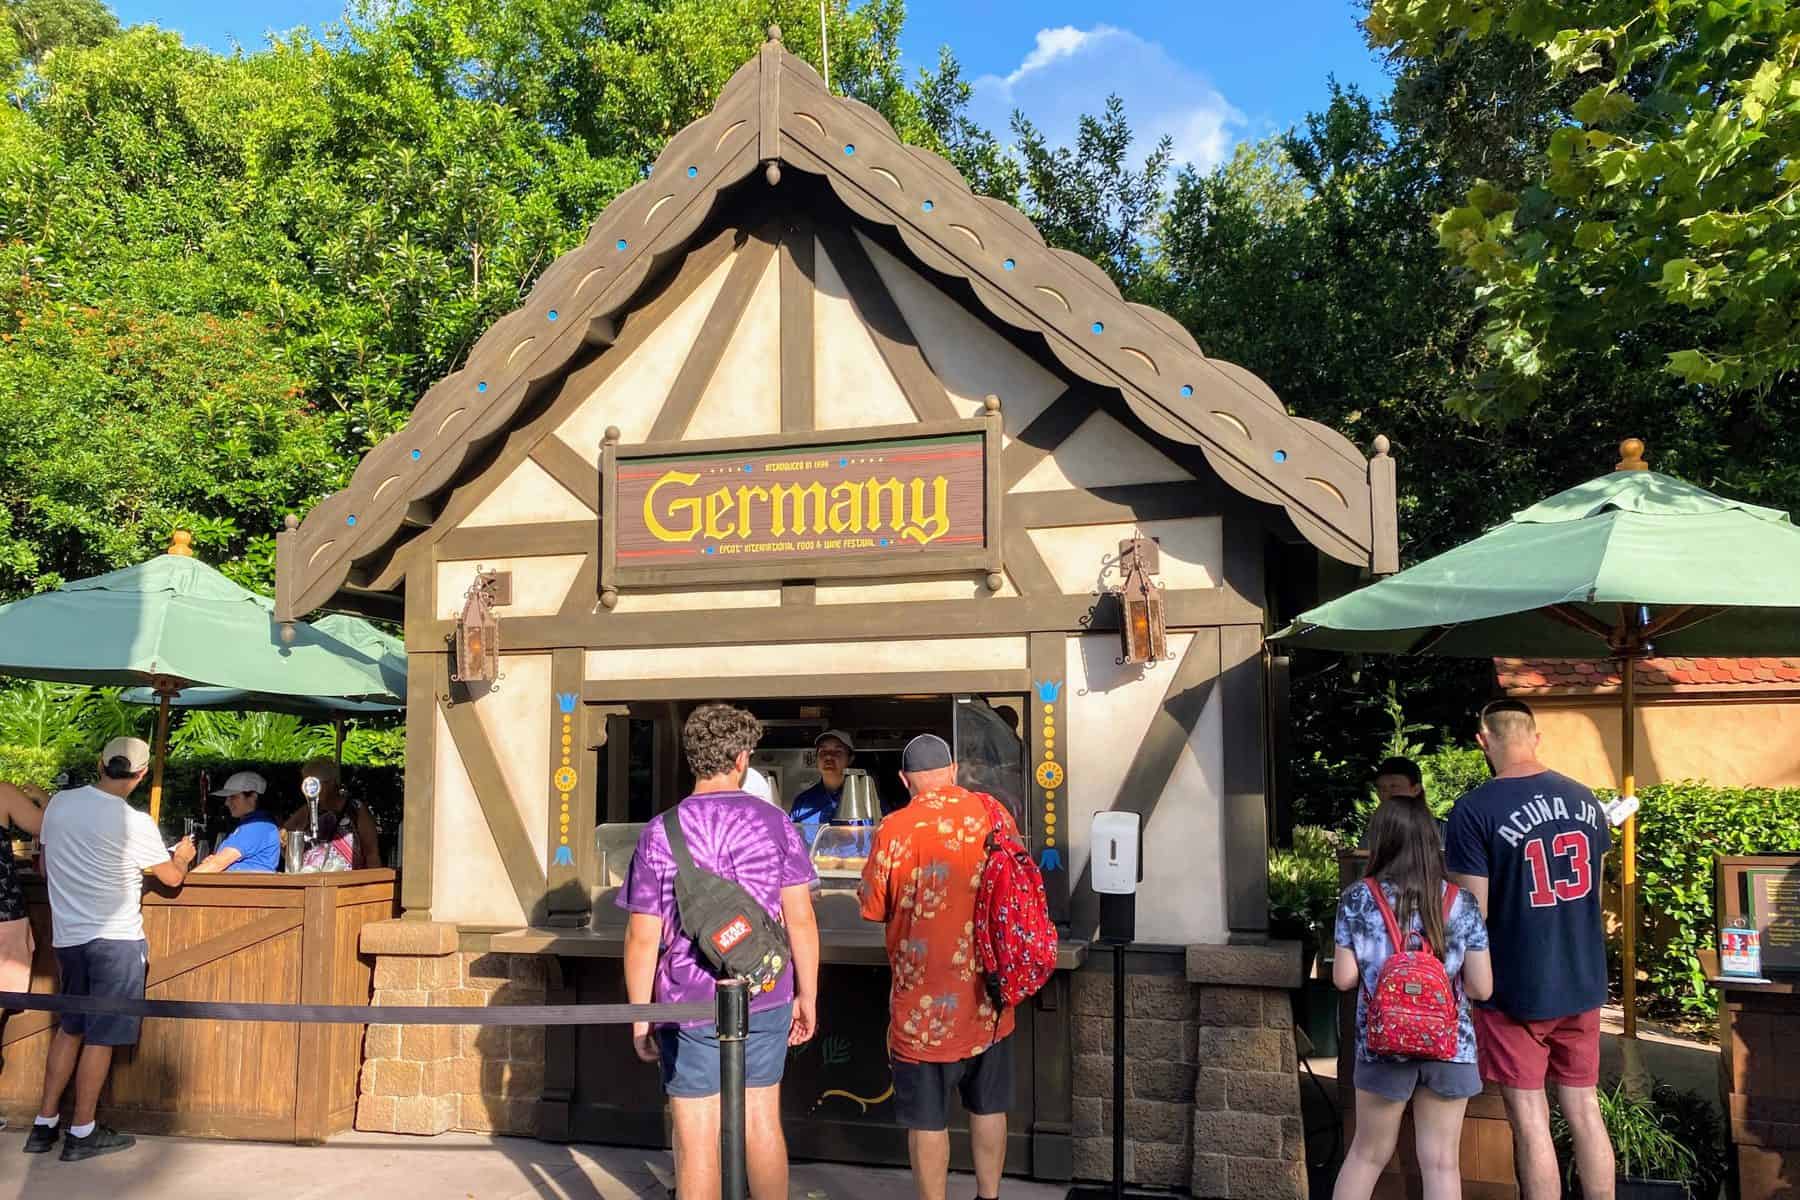 Germany Booth Menu & Review (2021 Epcot Food & Wine Festival)